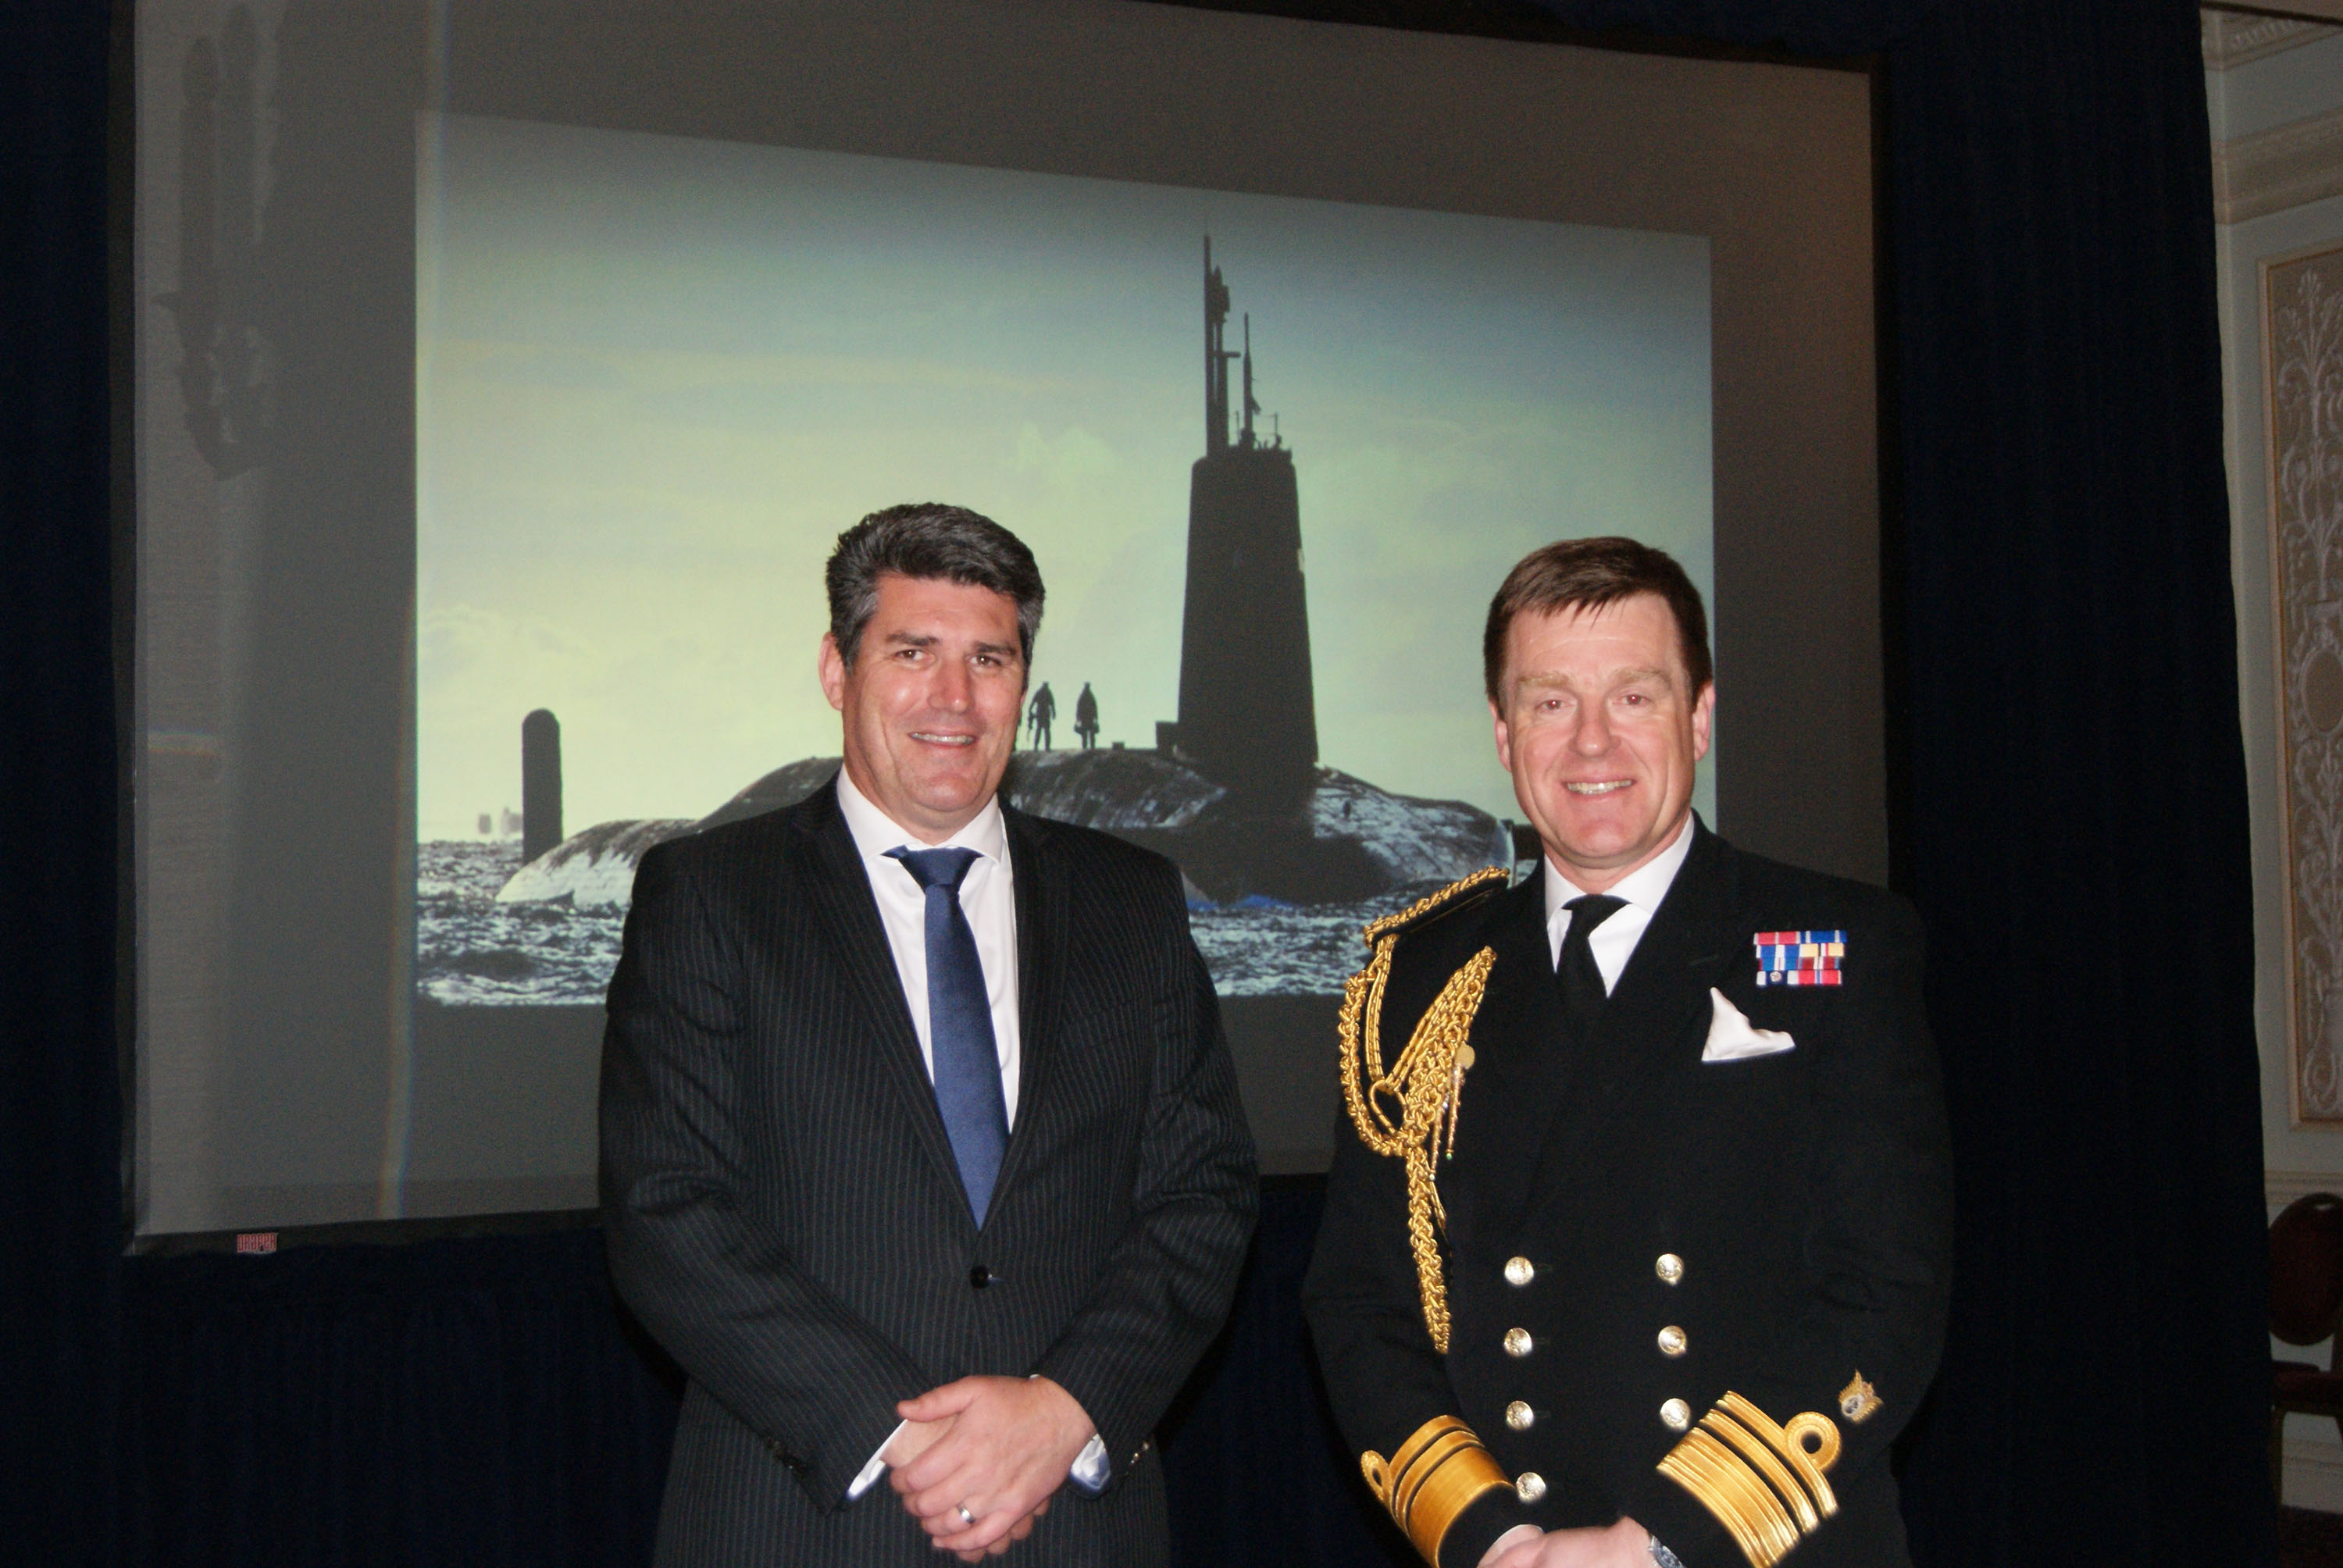 The Eighth Annual Foundation Lecture at the RAC Club, 2nd March 2017. Guest Speaker: Vice-Admiral Ben Key CBE (Old Bromsgrovian)